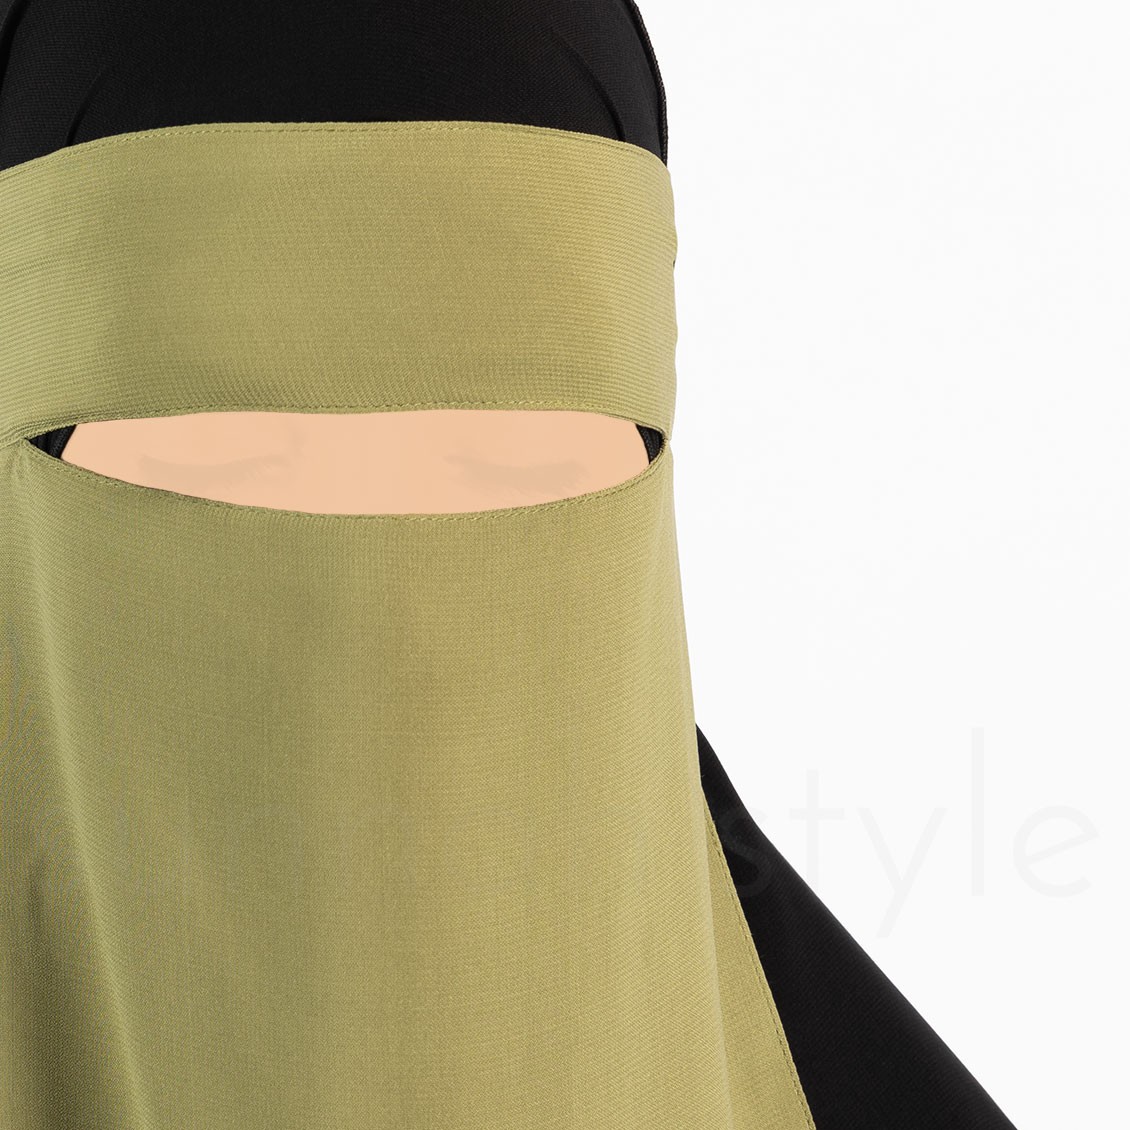 Sunnah Style Long One Layer Niqab Moss